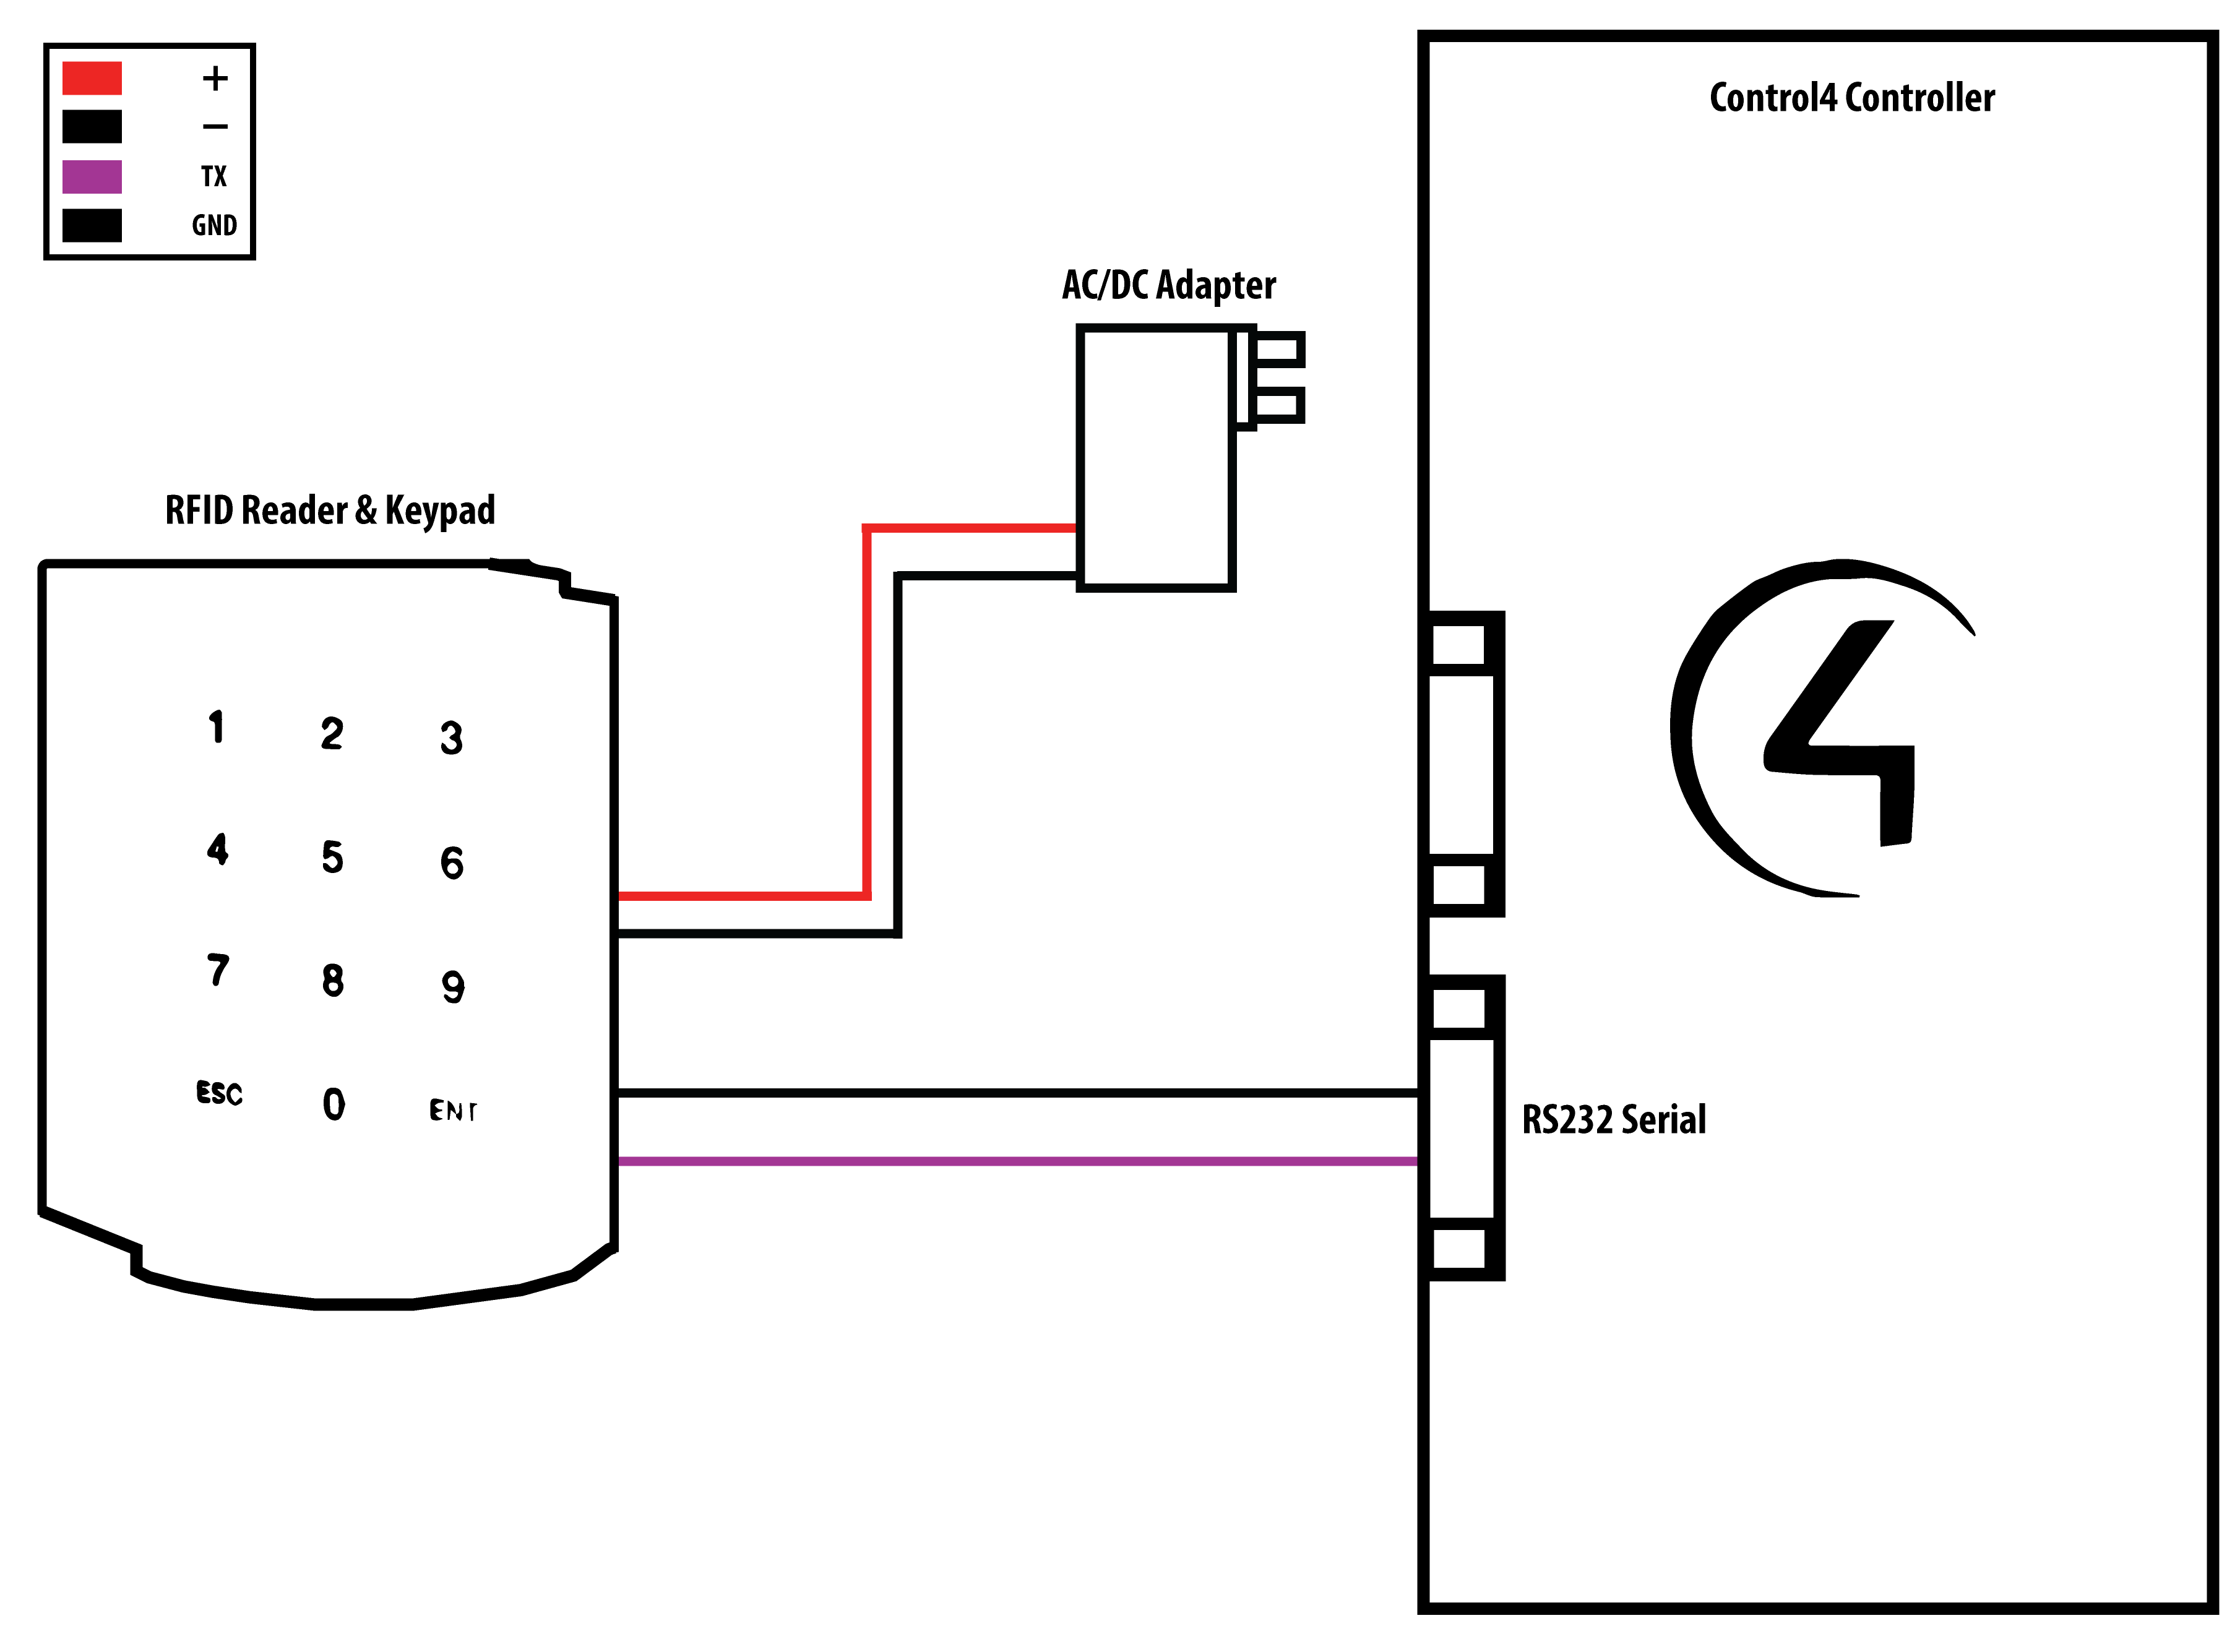 Hid Card Reader Wiring Diagram from www.houselogix.com